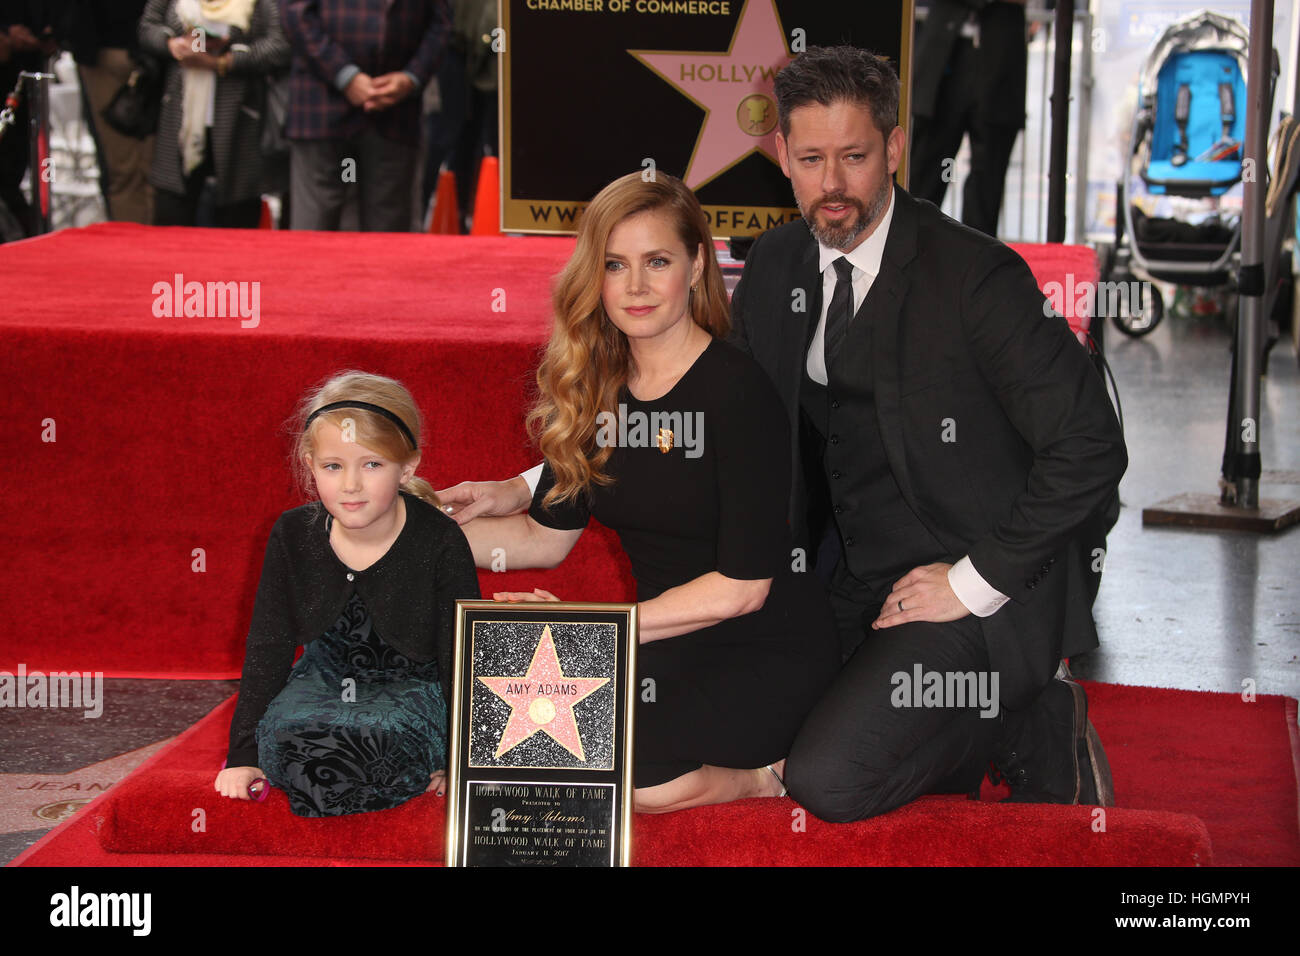 Hollywood, USA. 11th Jan, 2017. Actress Amy Adams with daughter Aviana Olea Le Gallo and husband Darren Le Gallo honored on the Hollywood Walk of Fame.  in Hollywood, California. © Faye Sadou/Media Punch/Alamy Live News Stock Photo